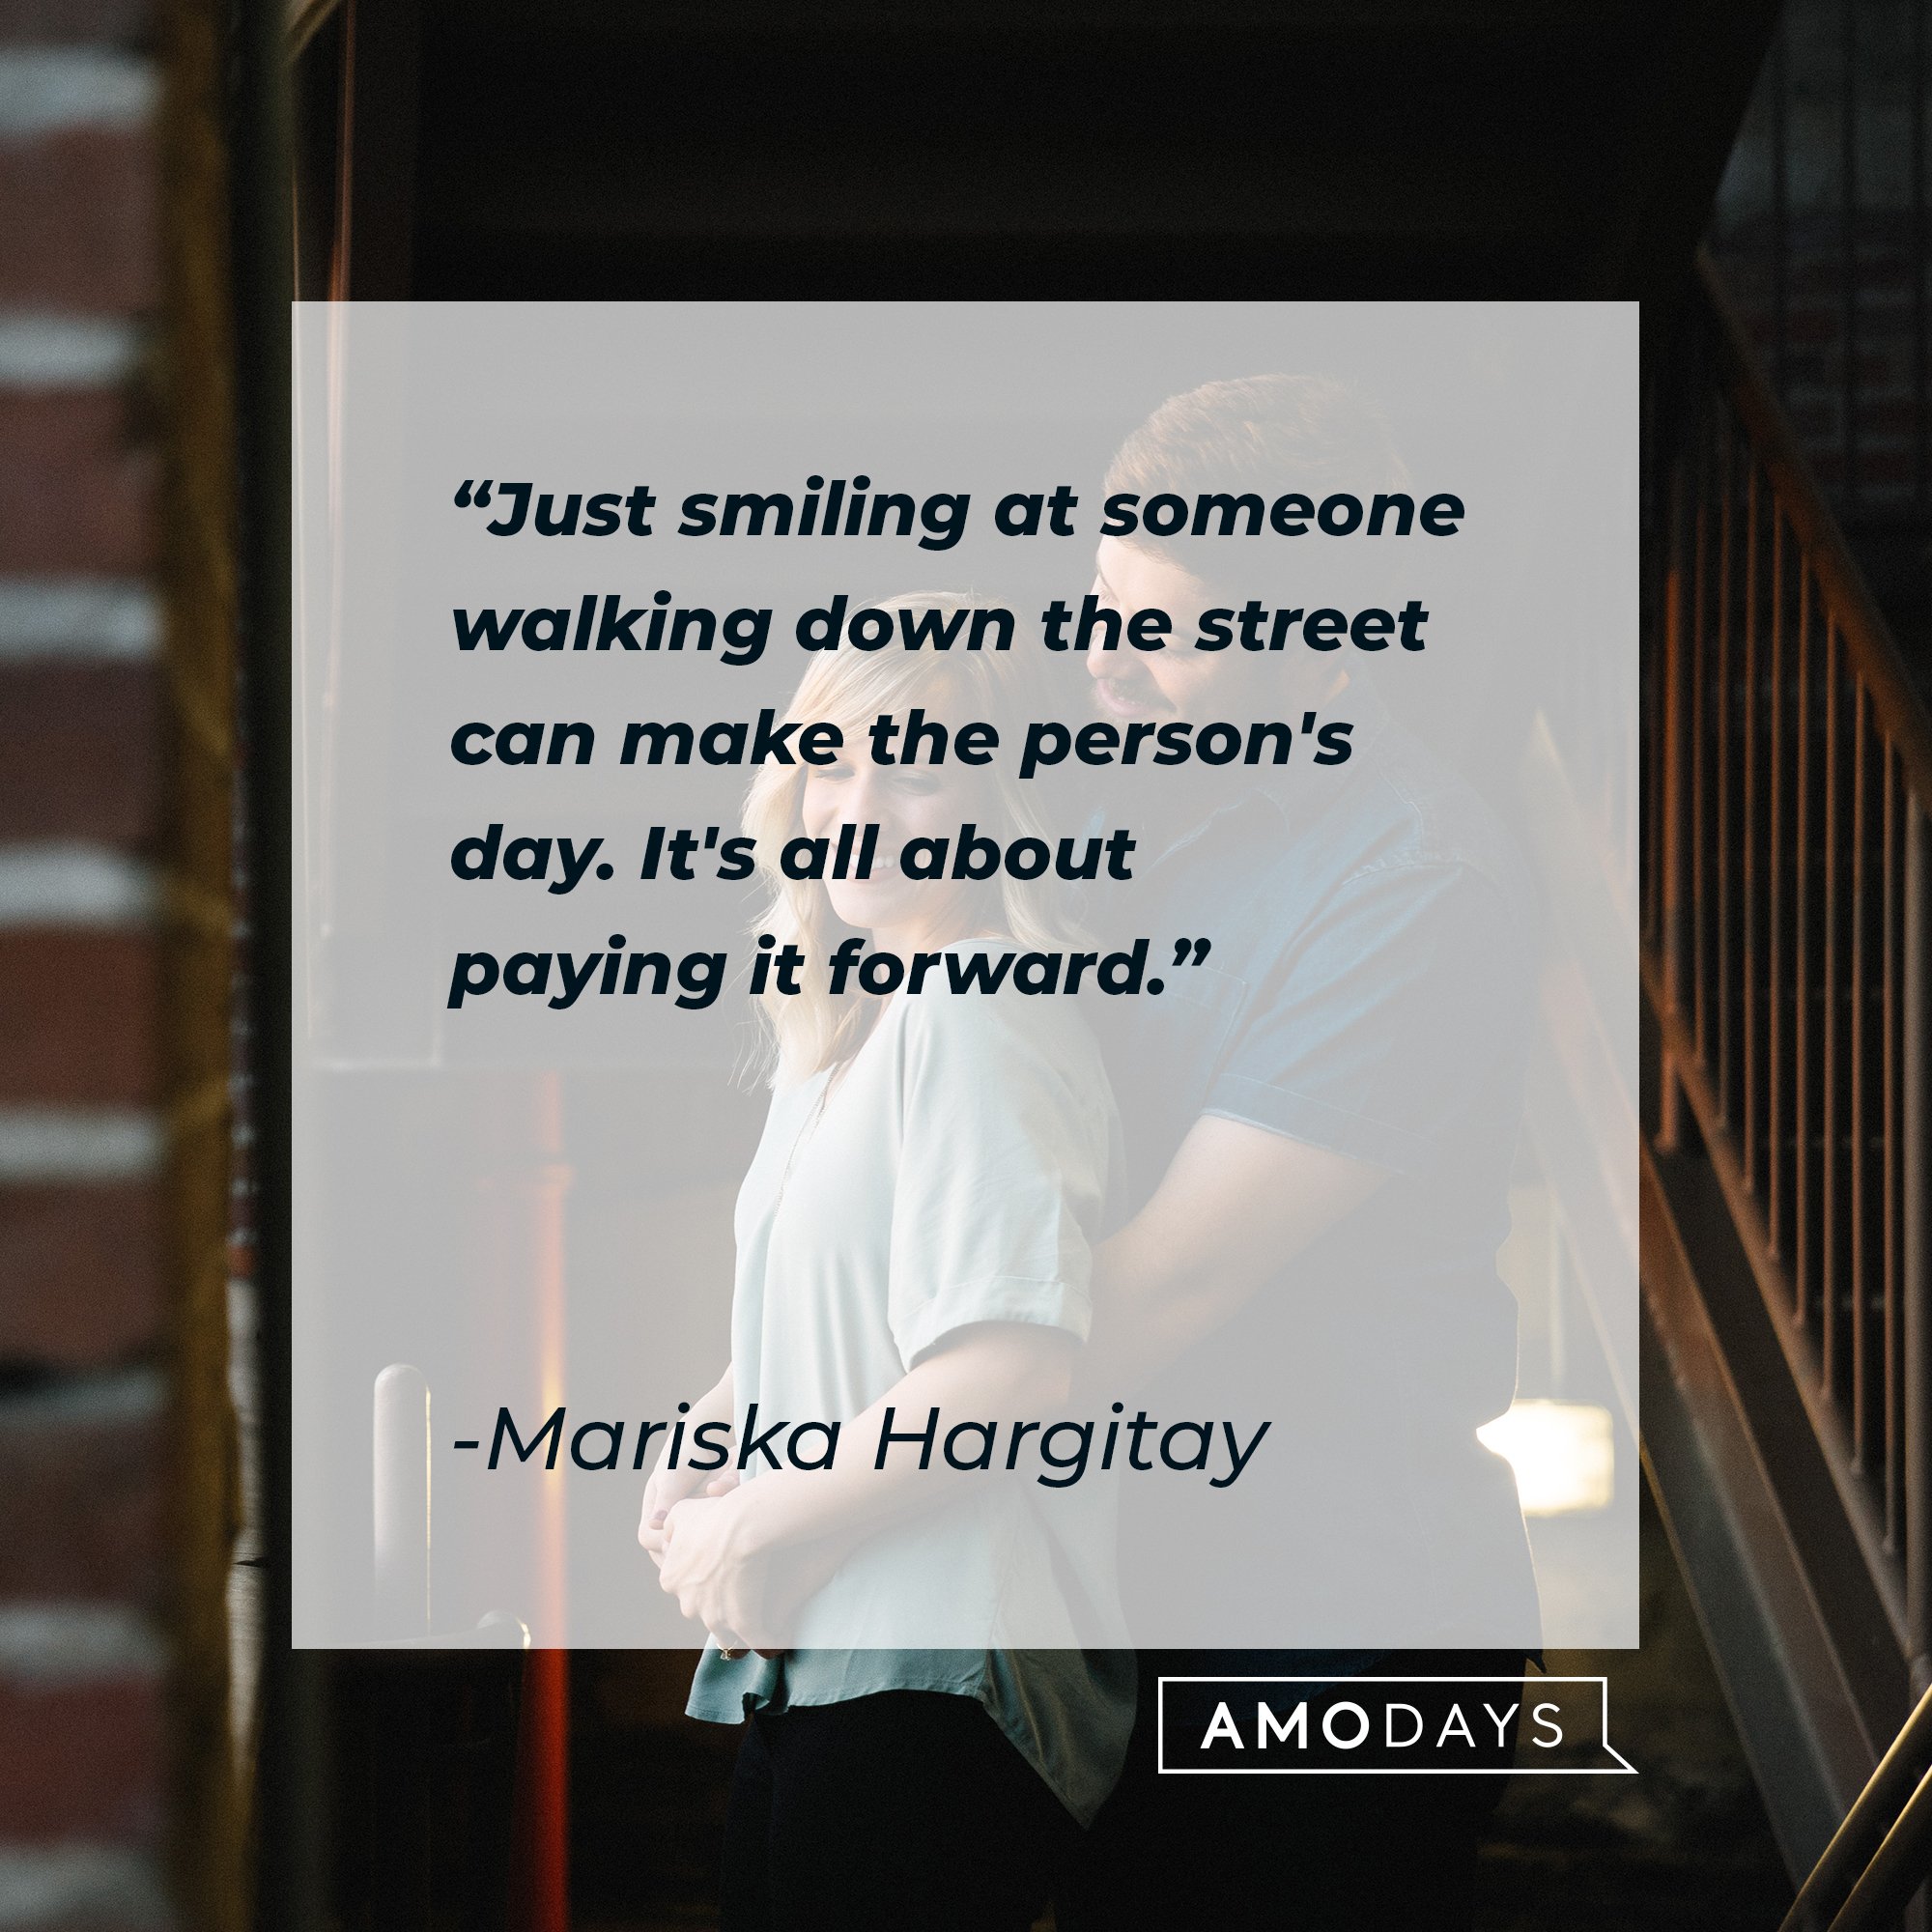 Mariska Hargitay’s quote: "Just smiling at someone walking down the street can make the person's day. It's all about paying it forward." | Image: AmoDays  